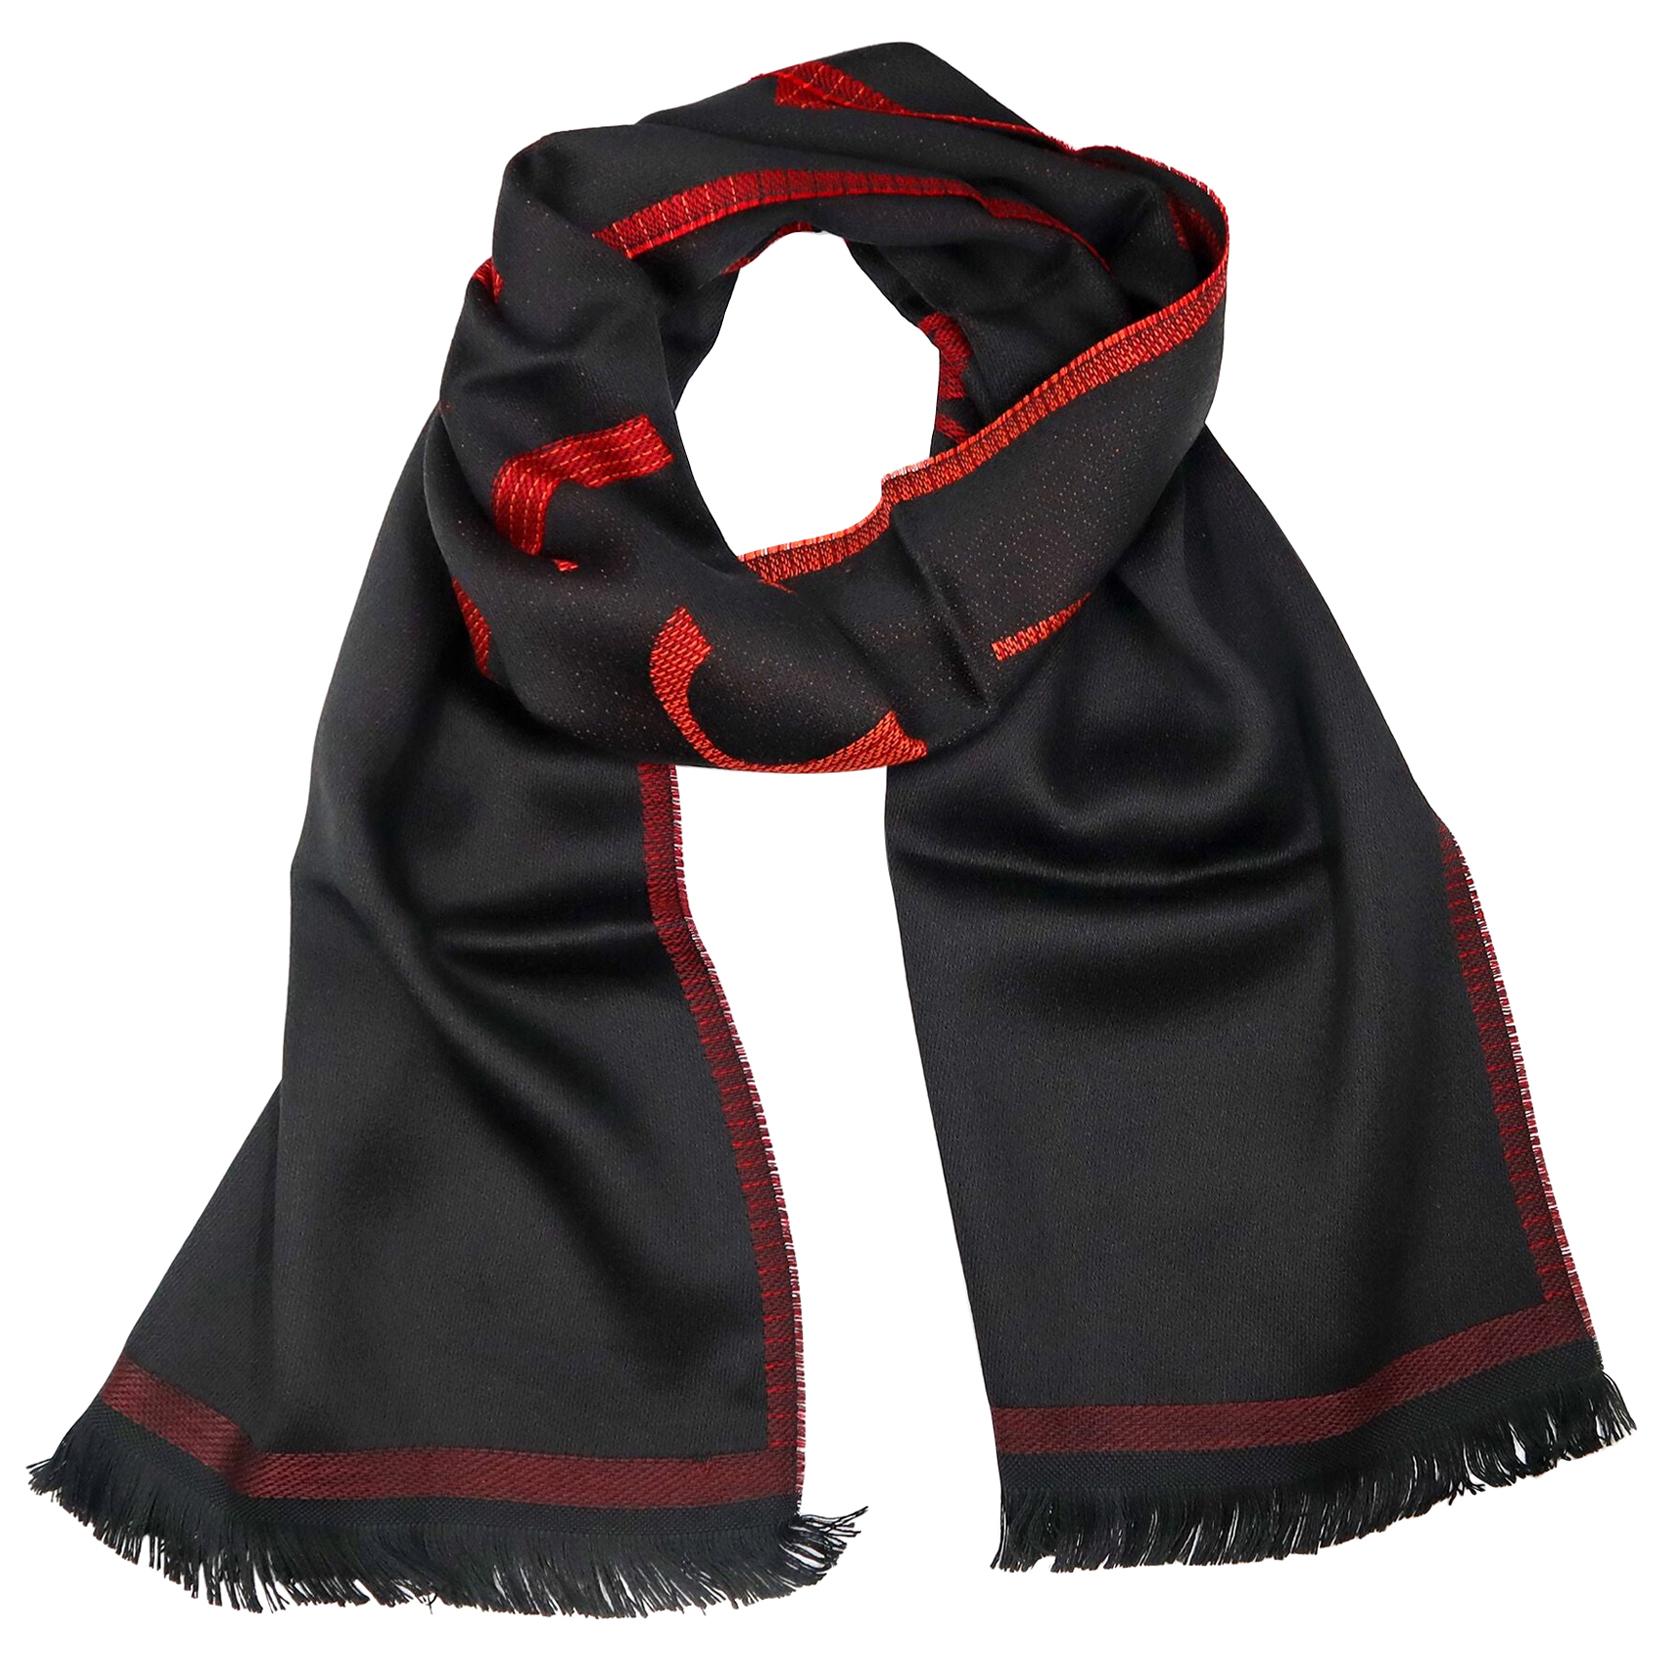 Details about   Versace 100% Wool Black/Red Scarf 36x180  Style #SC44LAA8758 0002 NEW 